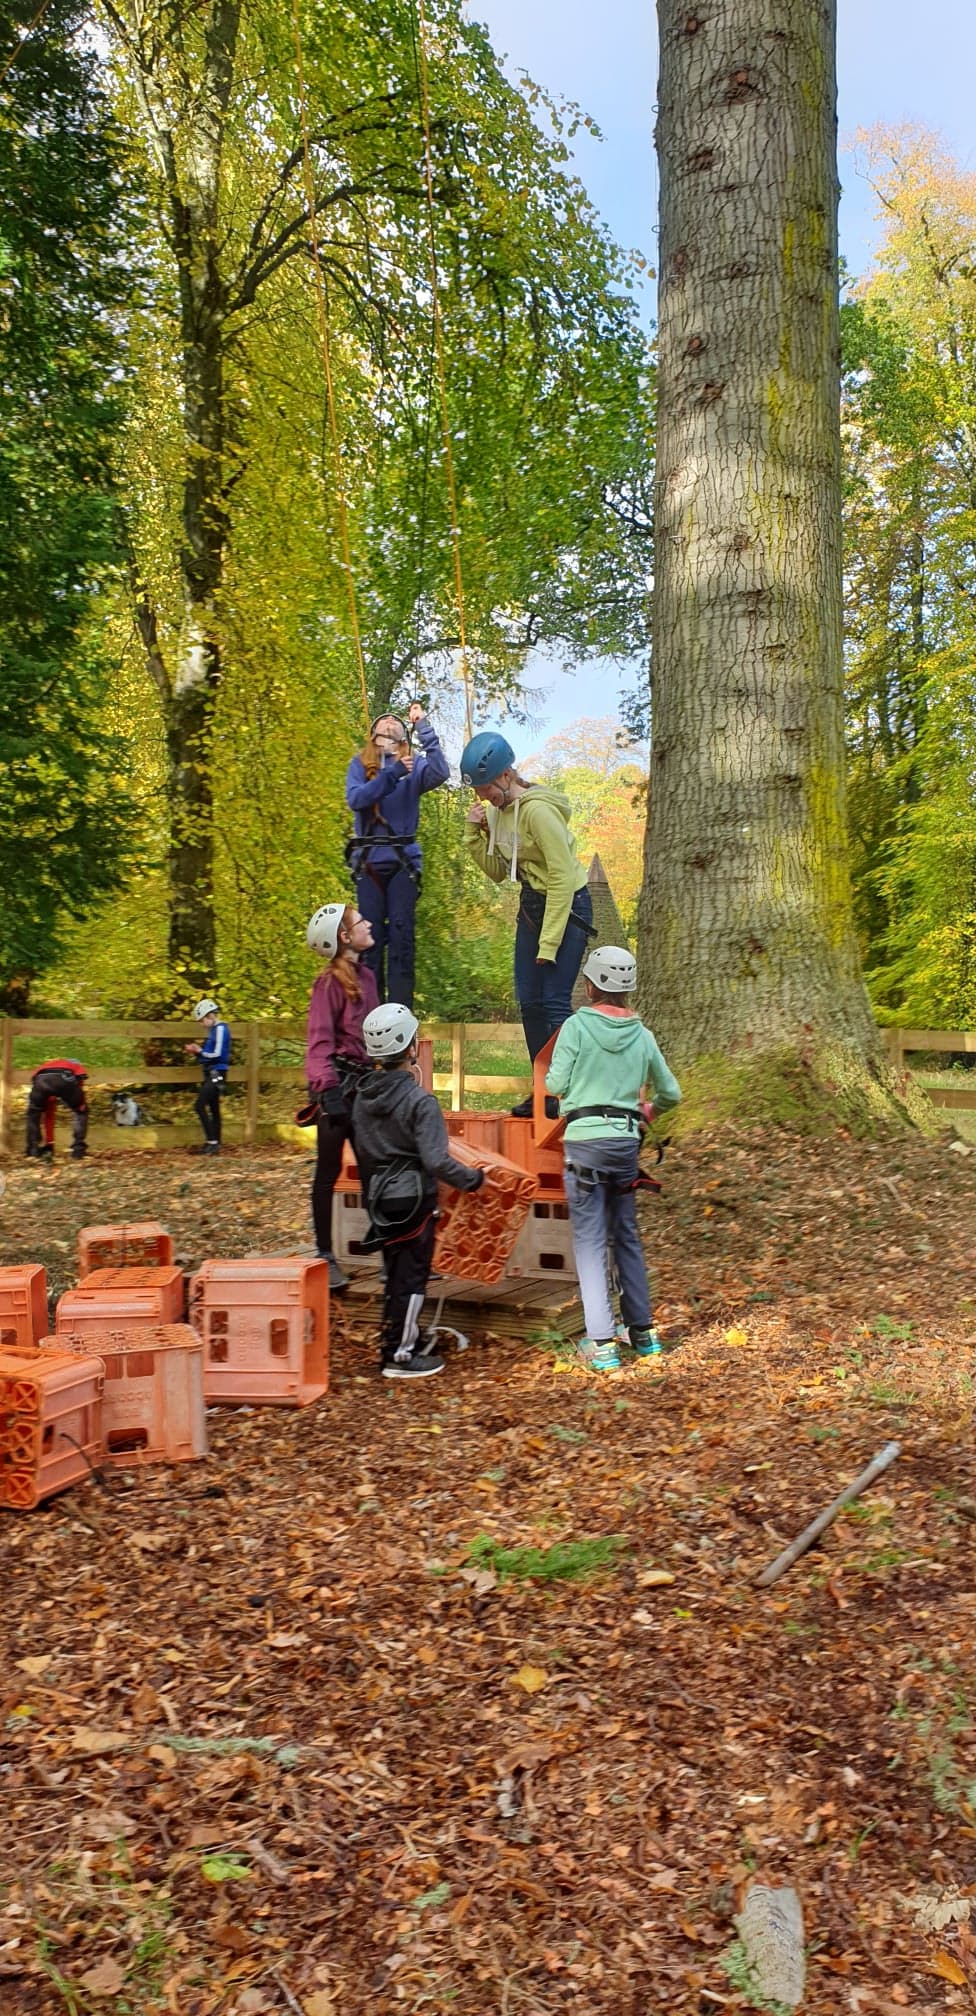 A group of children enjoying crate stacking activity at Fairburn.